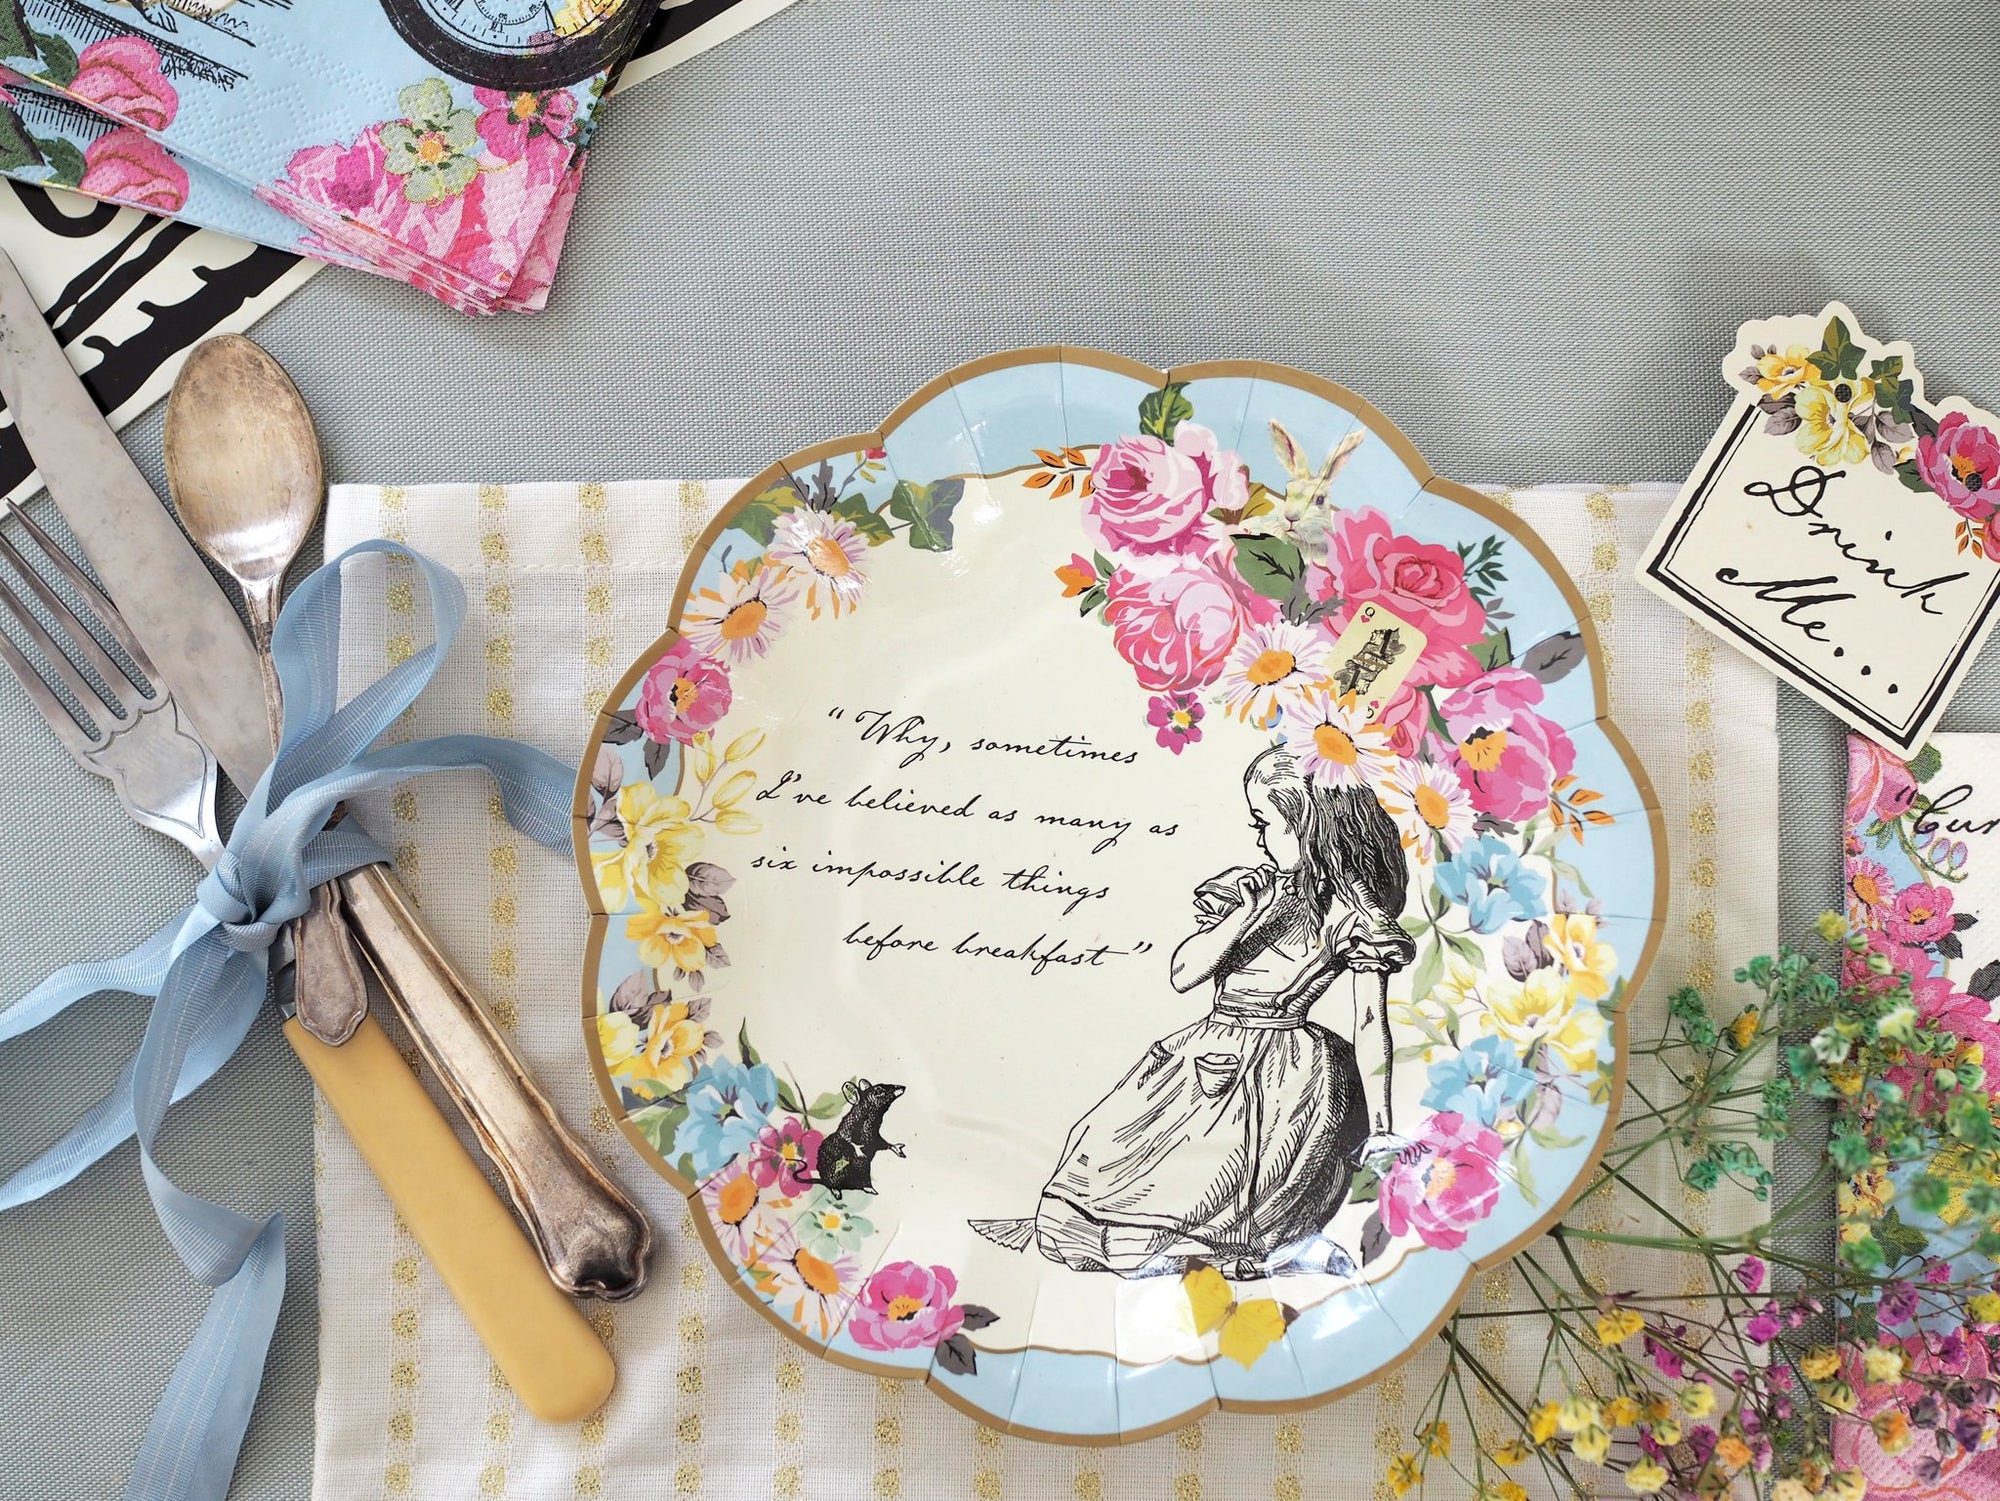 Assorted Alice in Wonderland Dessert Plates 12ct | The Party Darling